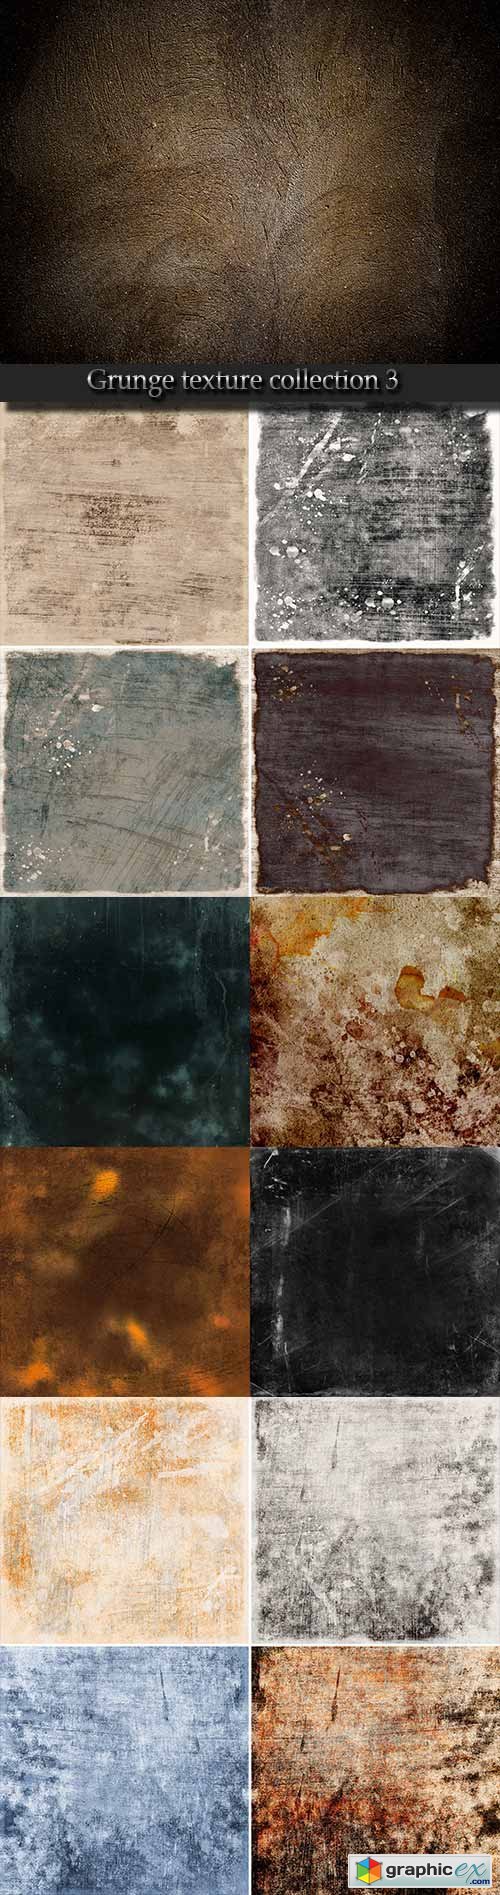 Grunge texture collection 3